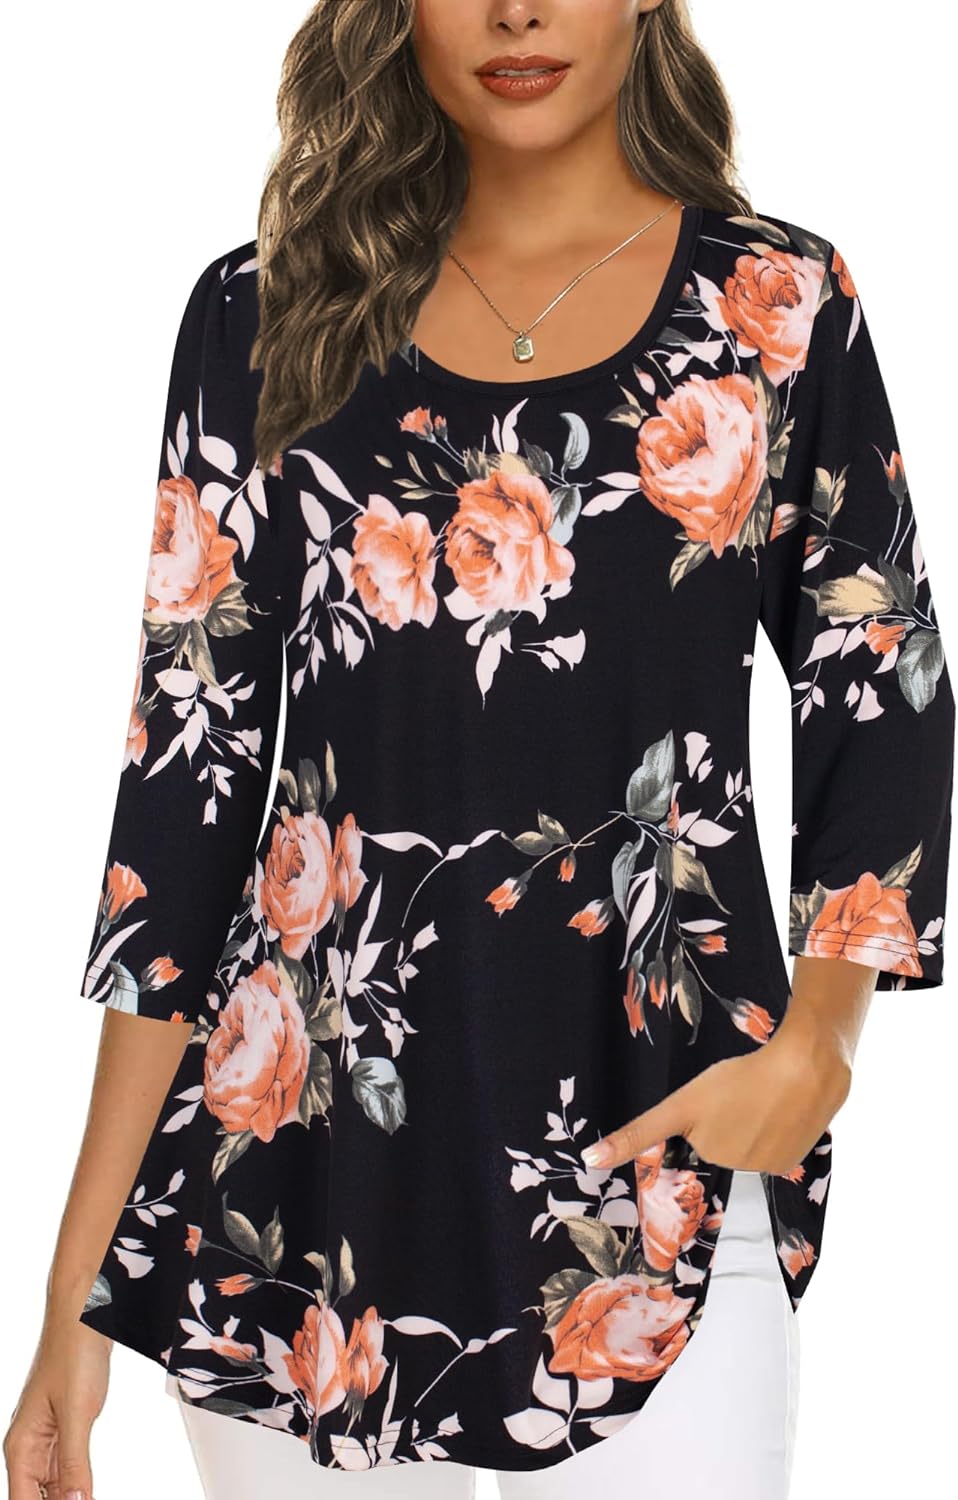 Tencole 3/4 Sleeve Shirts for Women Dressy Tunic Tops Casual Wear with  Floral